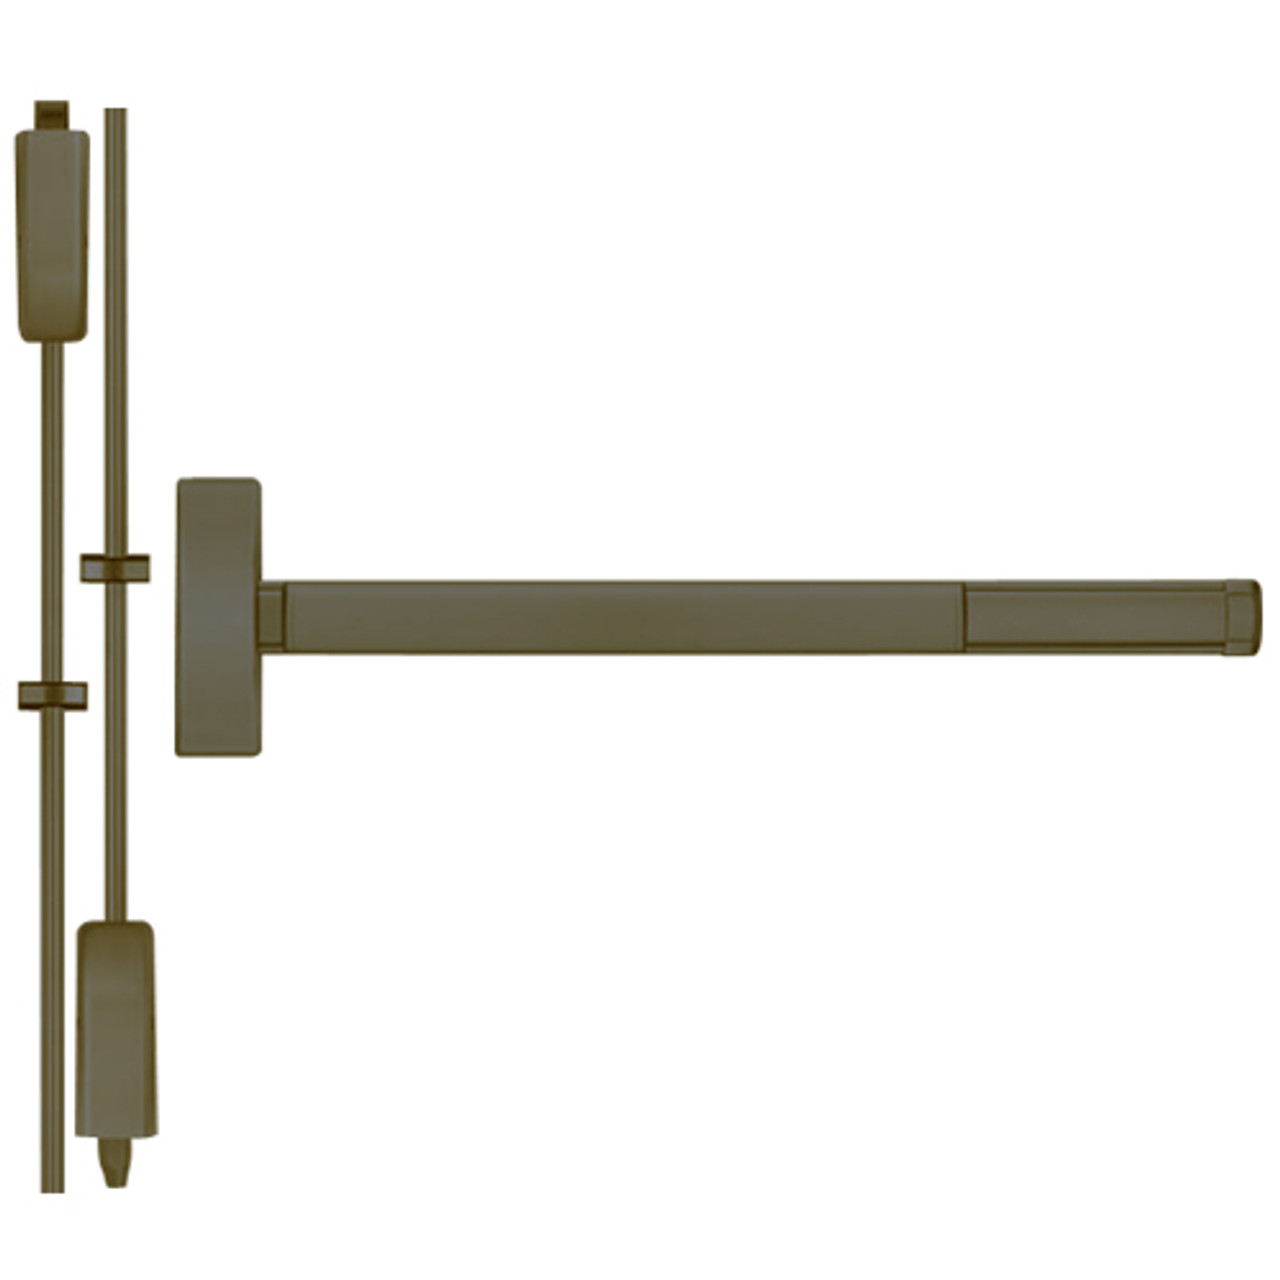 DE2203LBR-613-36 PHI 2200 Series Non Fire Rated Apex Surface Vertical Rod Device with Delayed Egress Prepped for Key Retracts Latchbolt in Oil Rubbed Bronze Finish